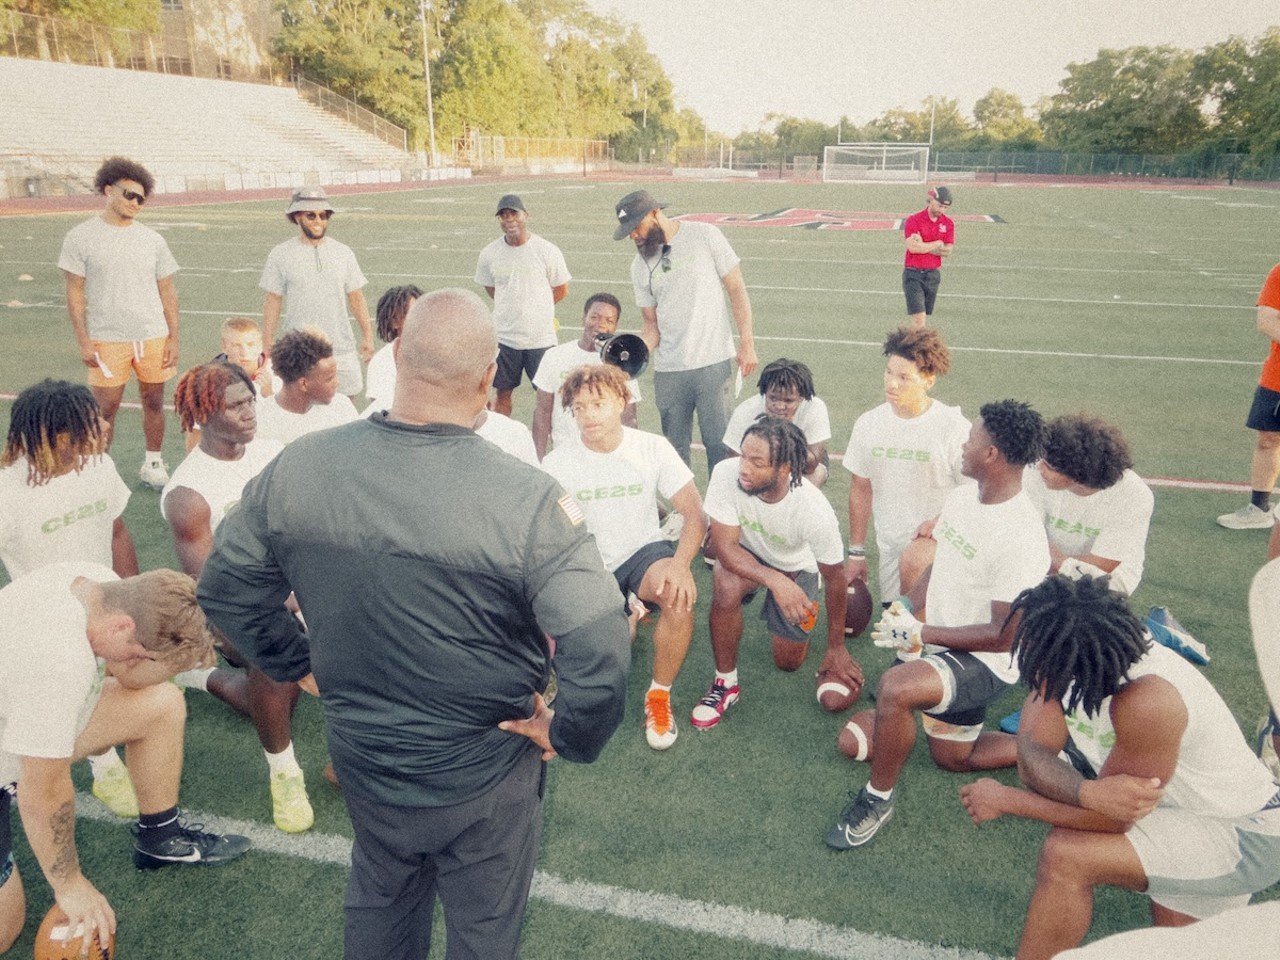 Coach David Walker, former Detroit Lions and Chicago Bears running back coach, speaking to the top 25 running backs about football and the lifestyle that comes with it.